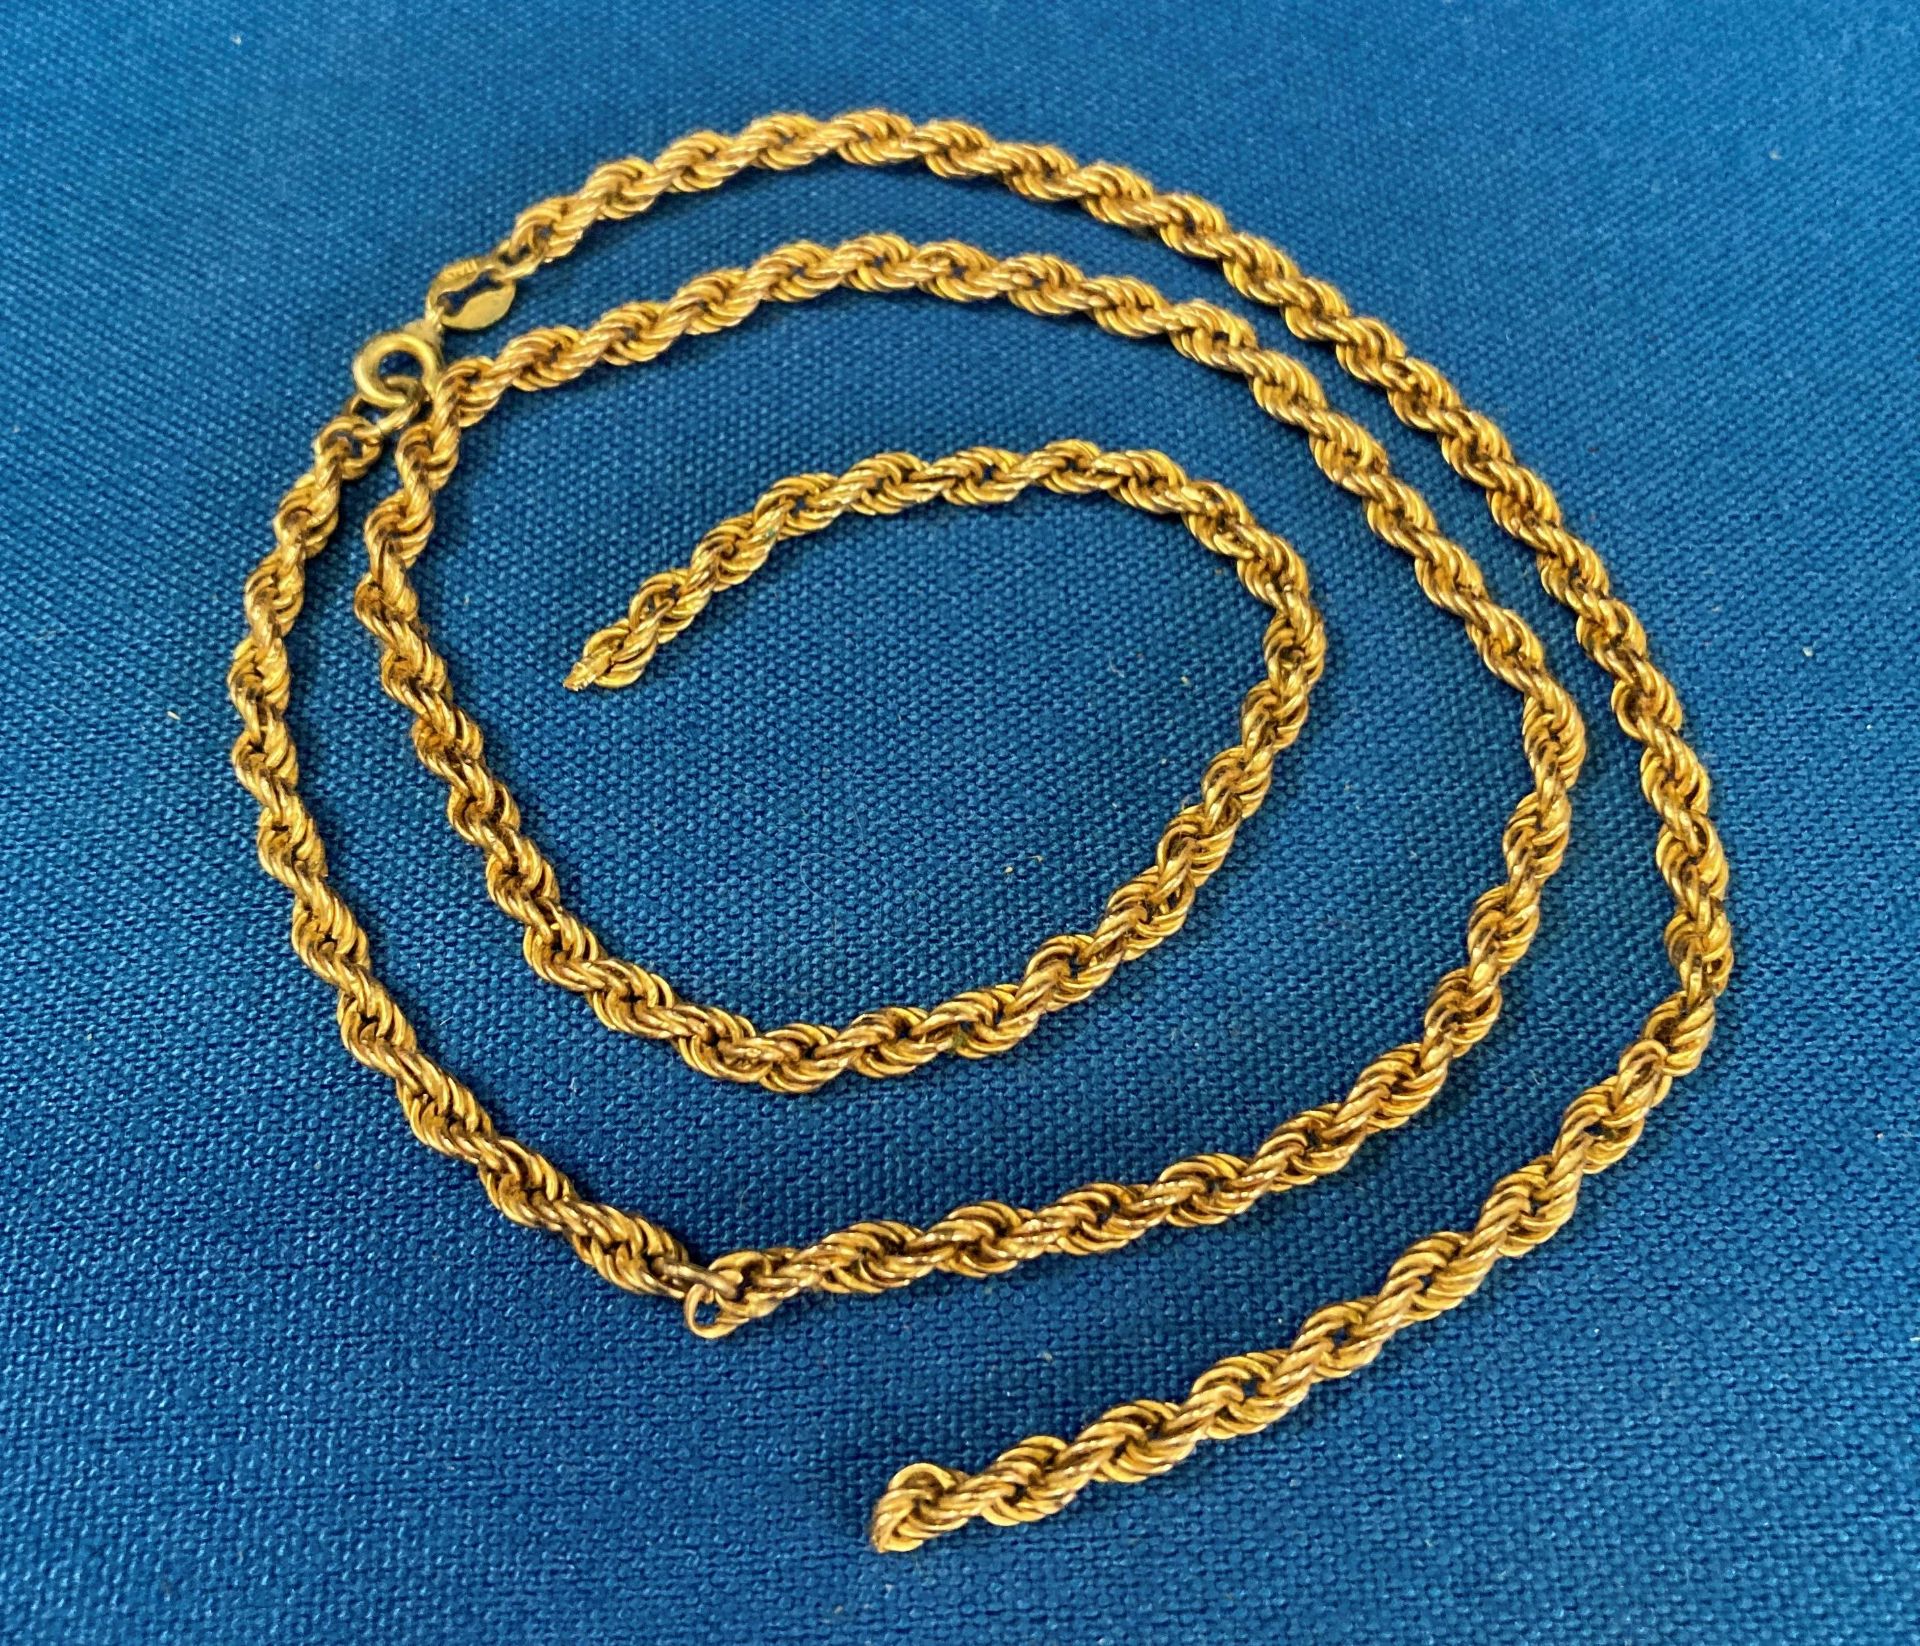 Two 9ct gold (375) chain, 17" and 18" long - both broken. - Image 3 of 3